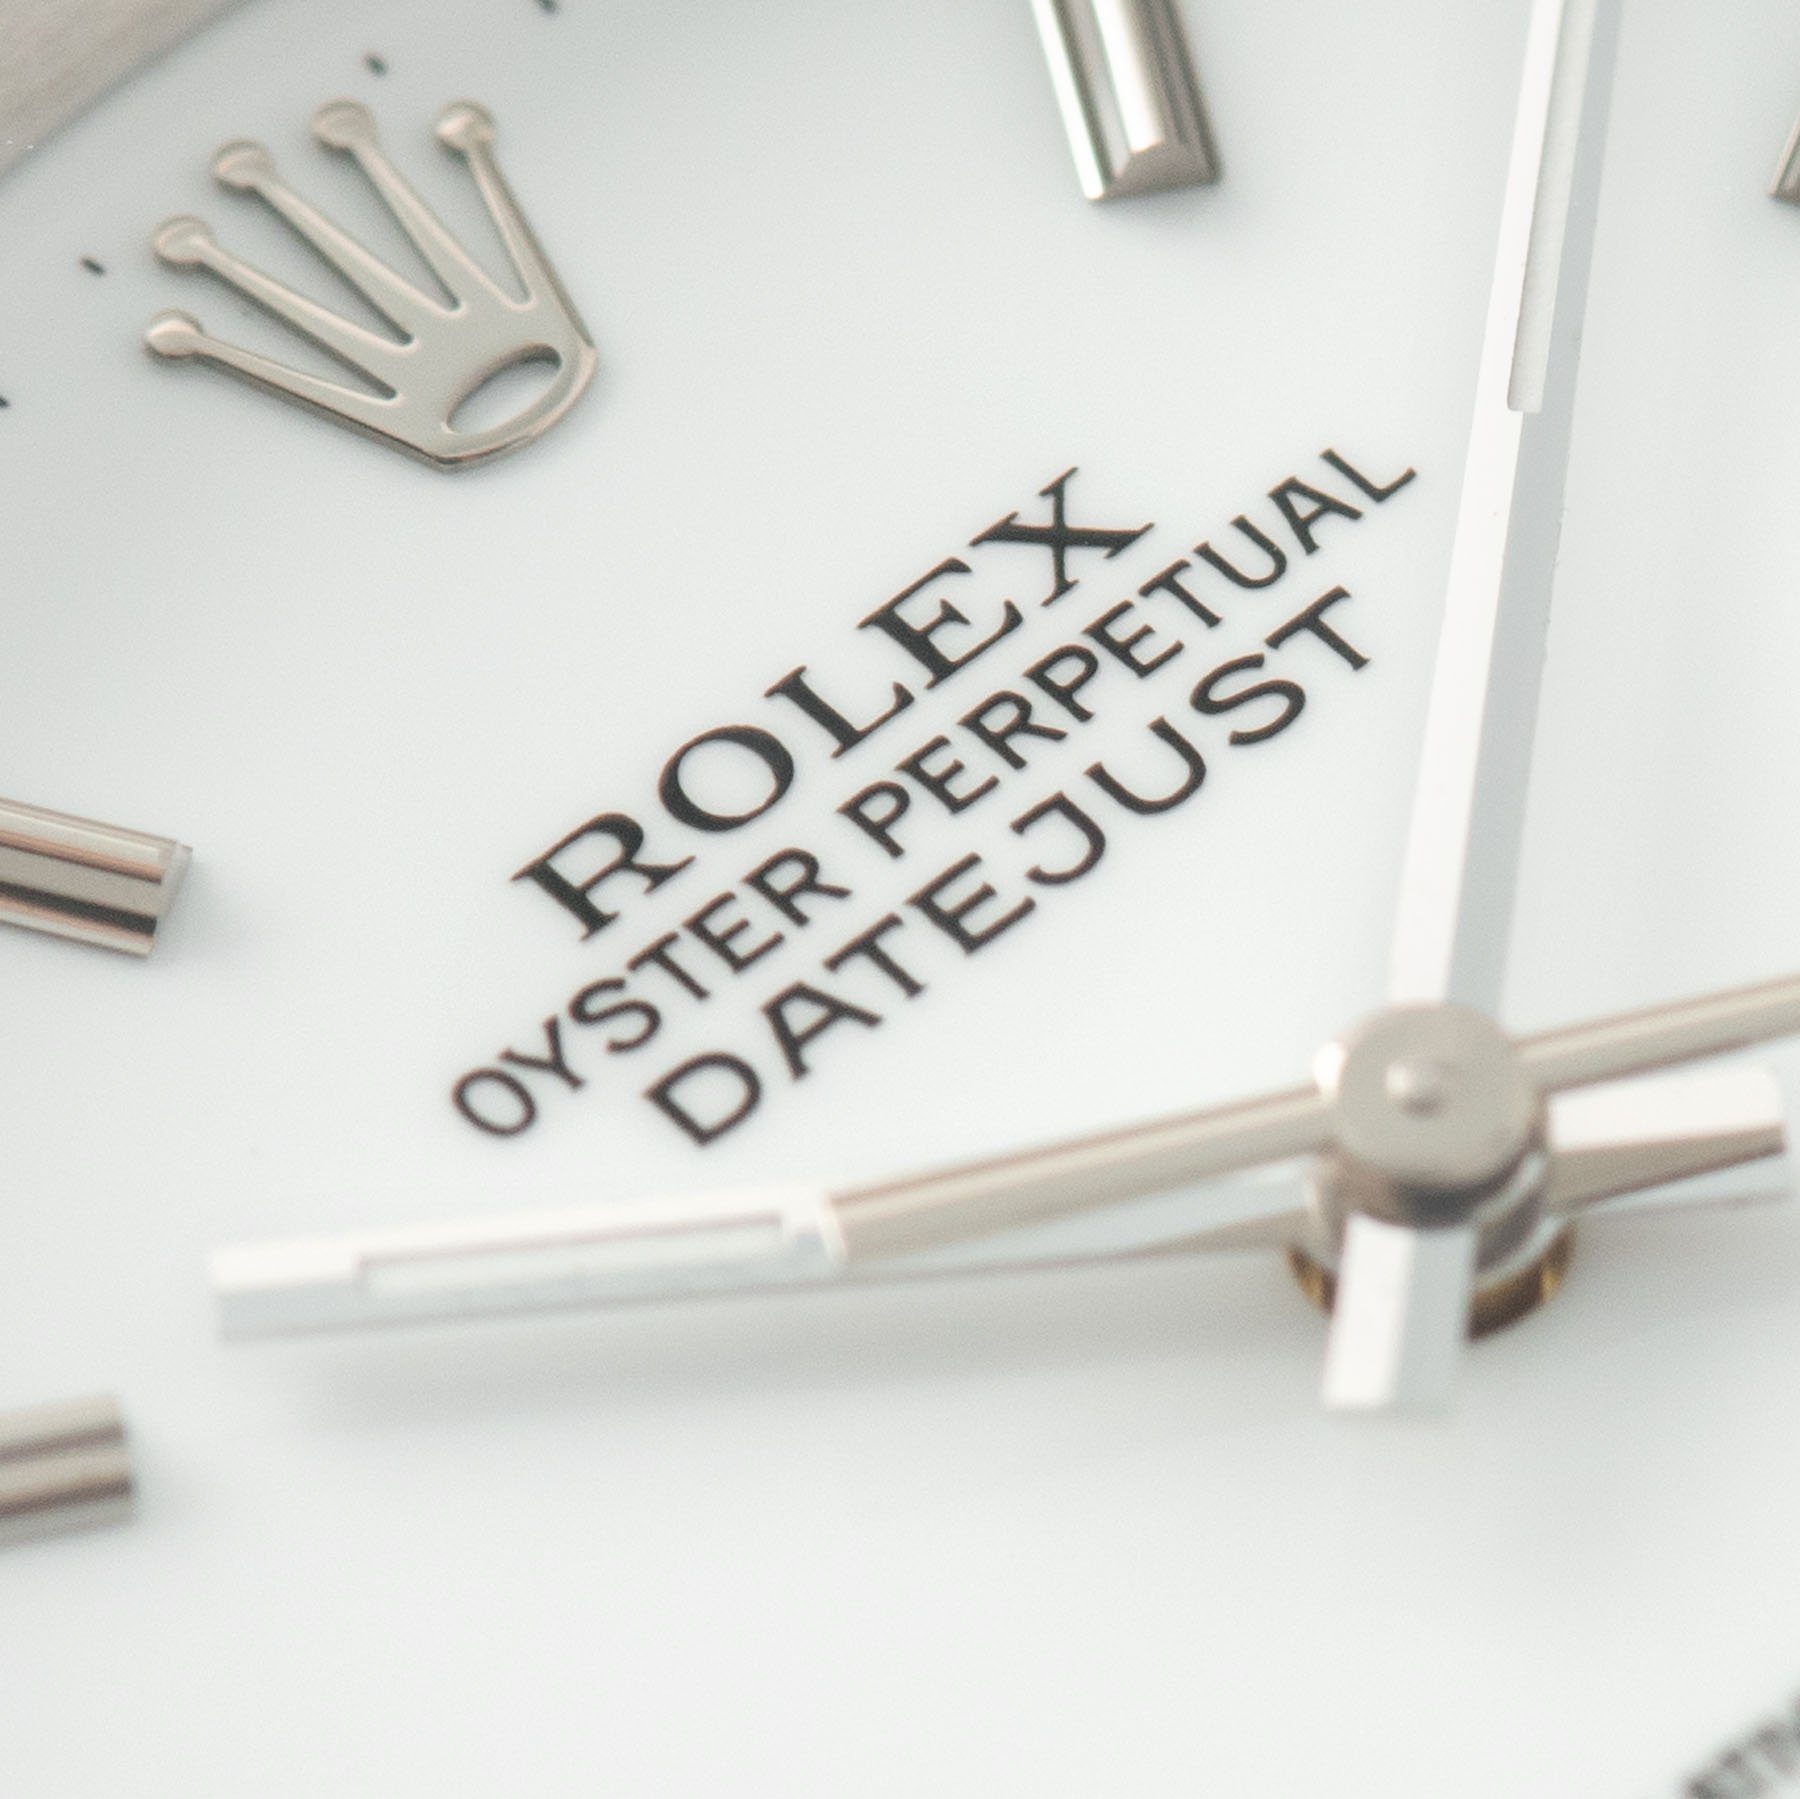 Rolex Datejust White Porcelain Dial Reference 16200 